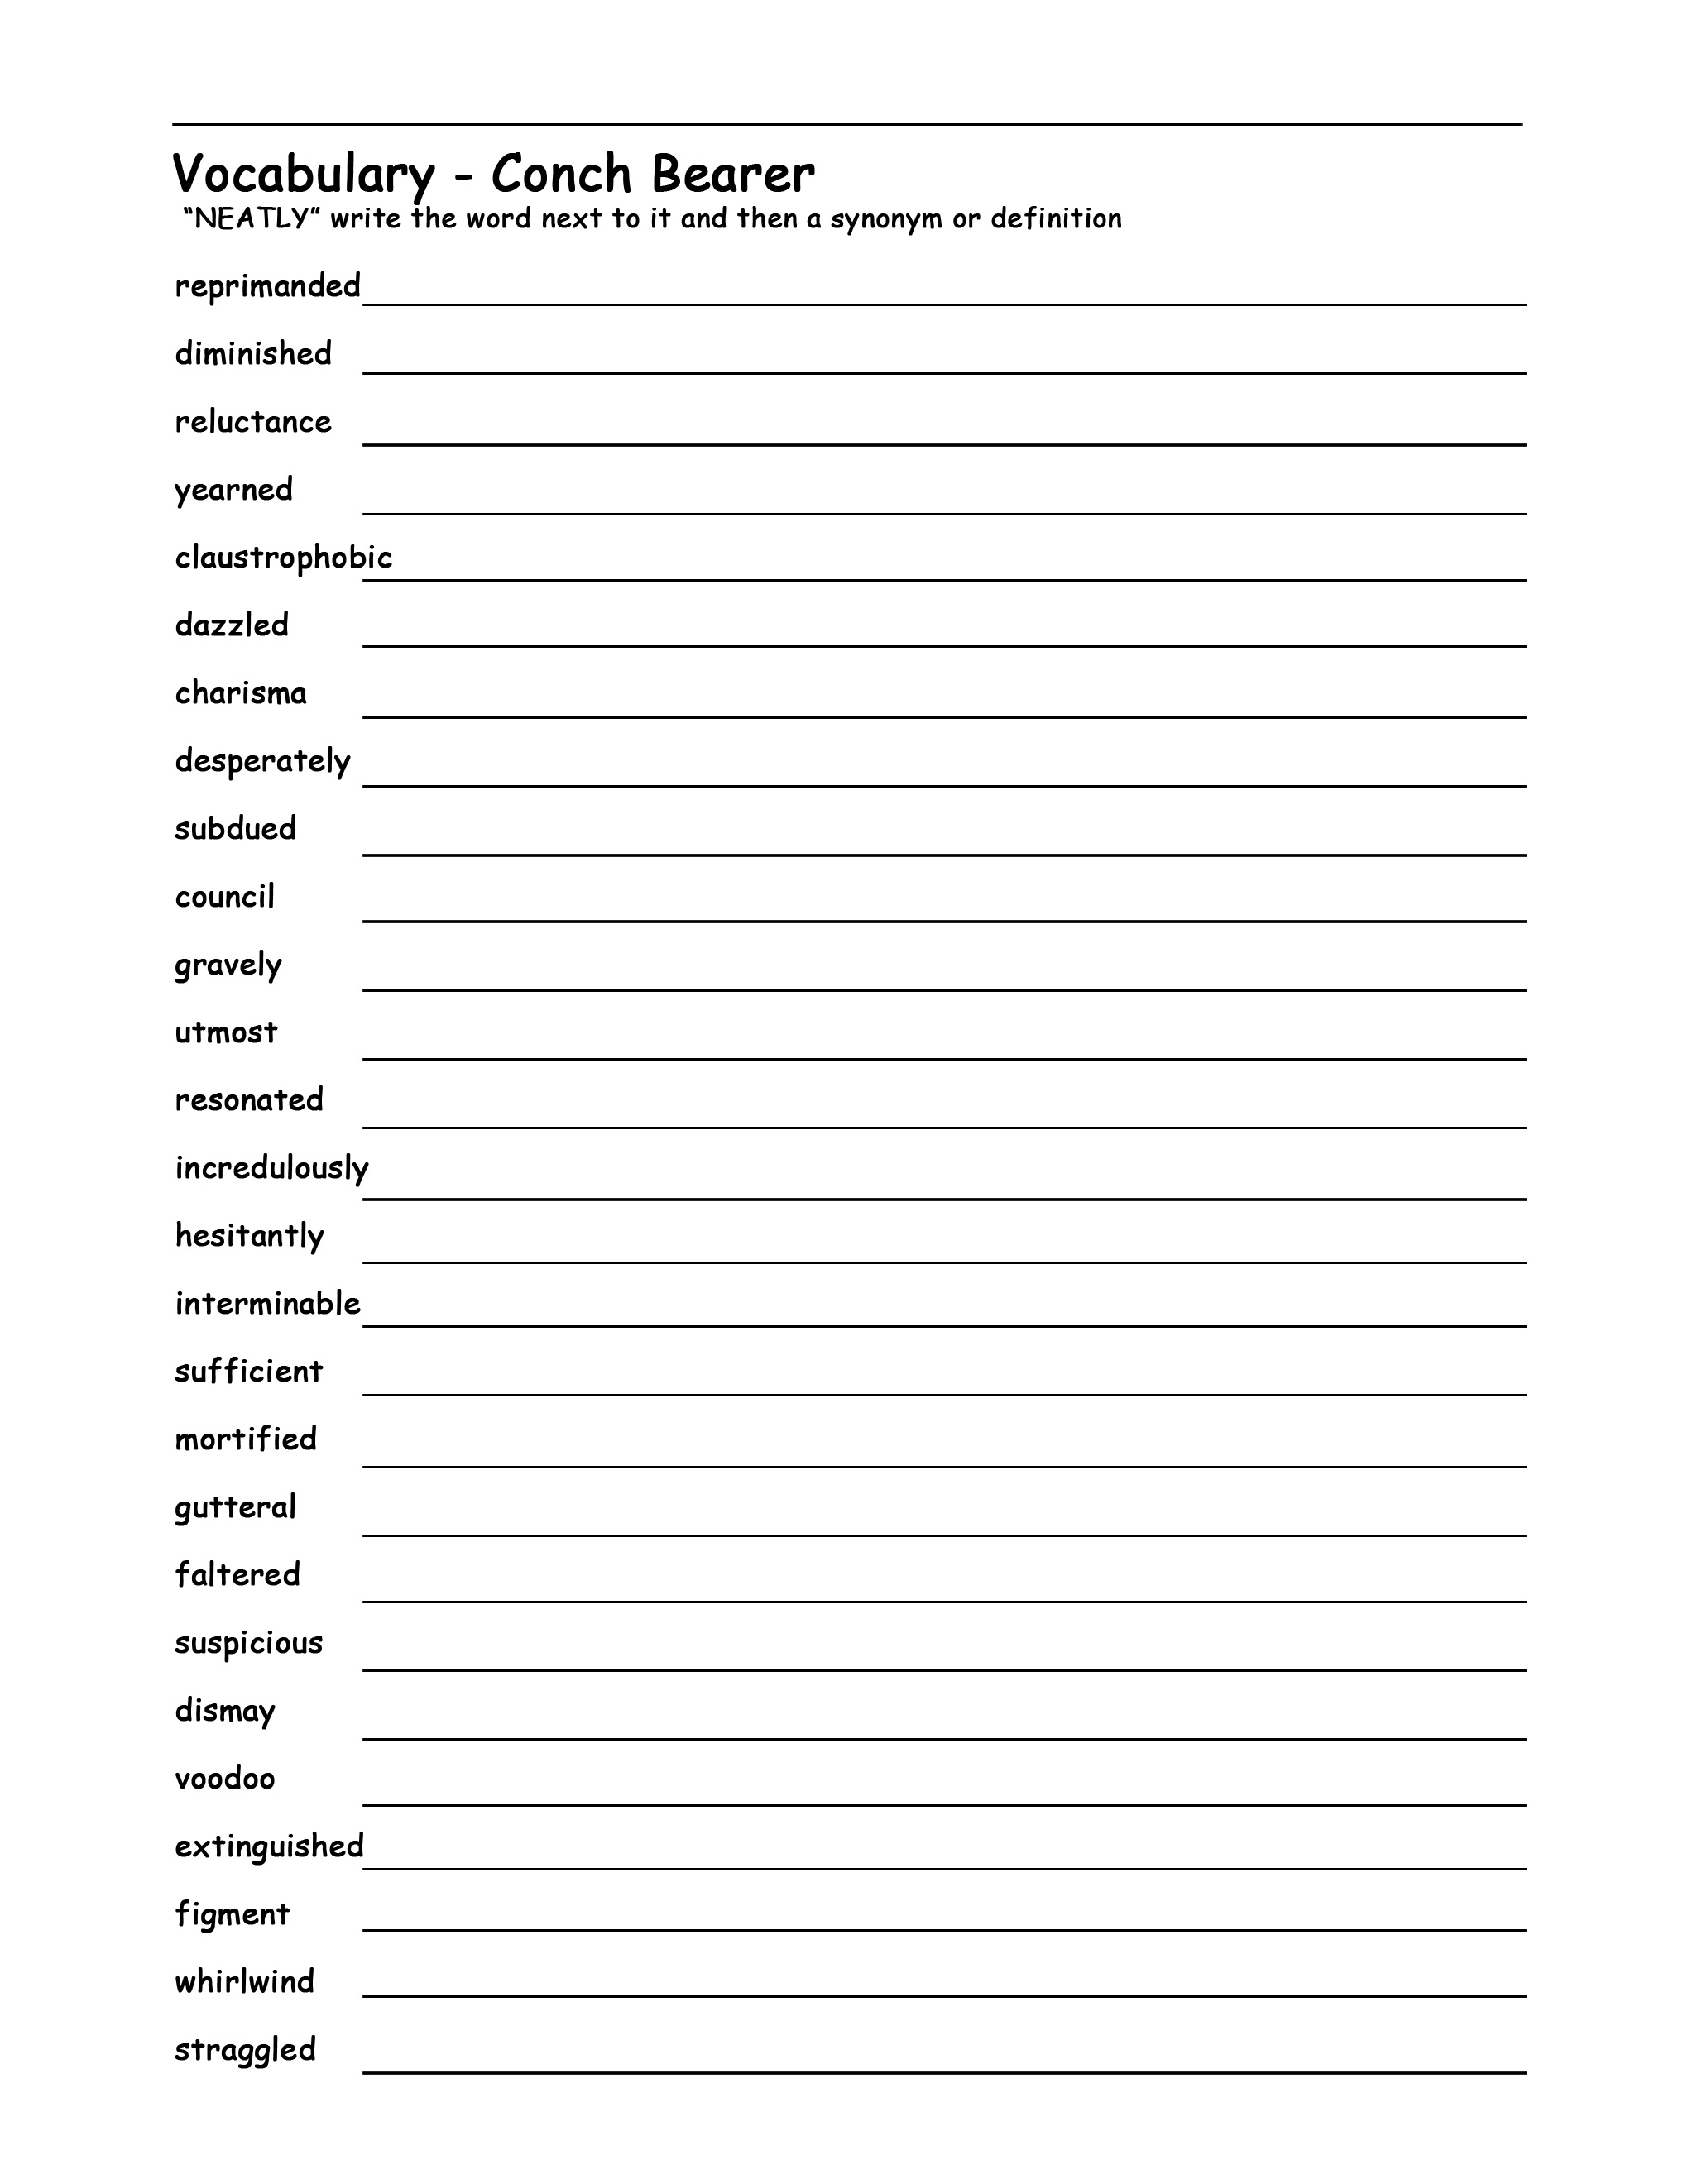 12-best-images-of-classroom-vocabulary-worksheets-classroom-language